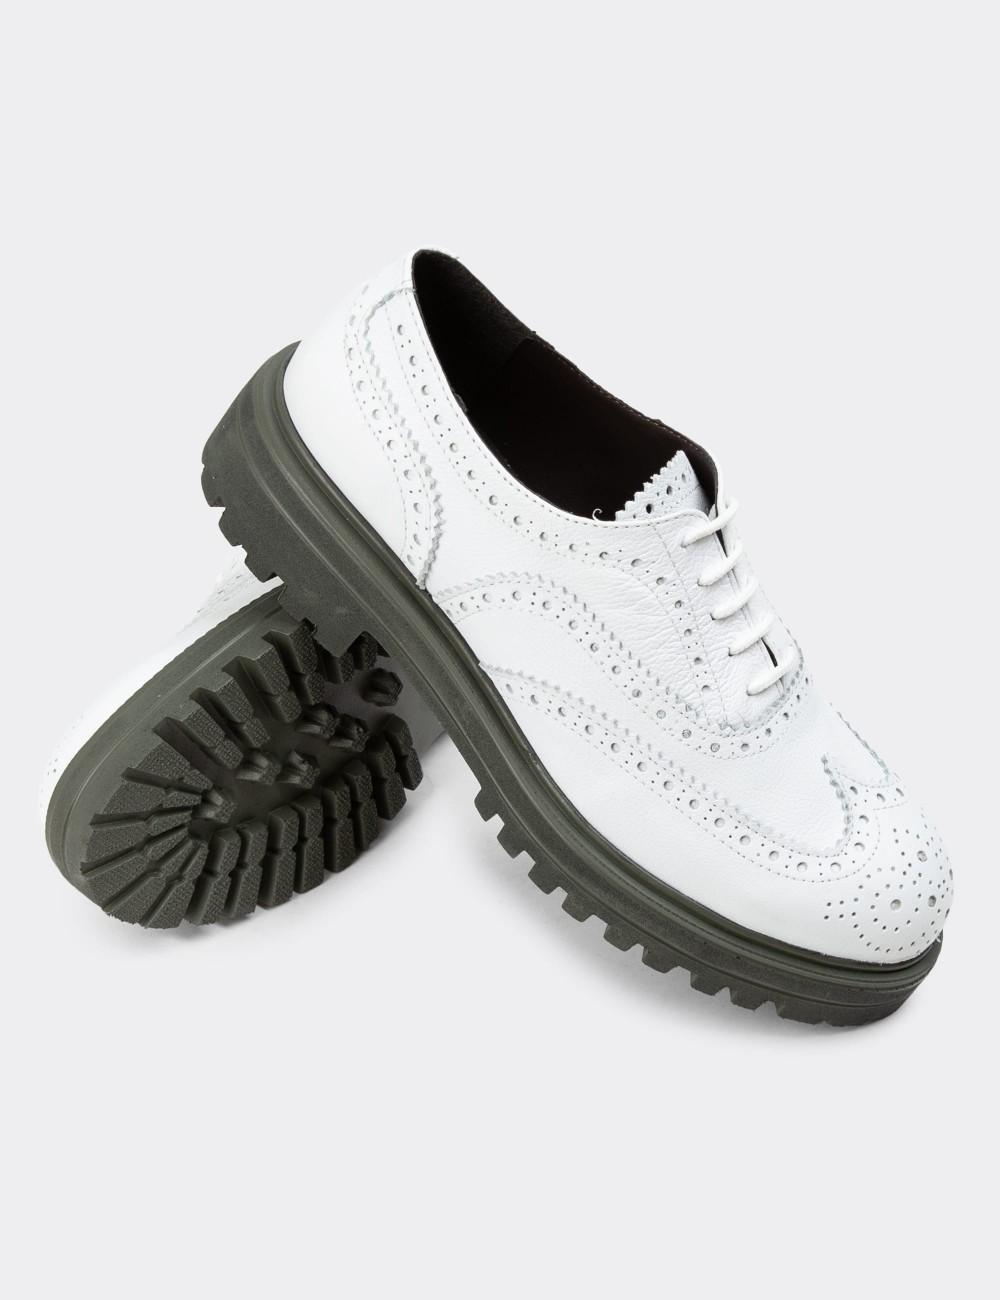 White Leather Oxford Shoes - 01418ZBYZE02